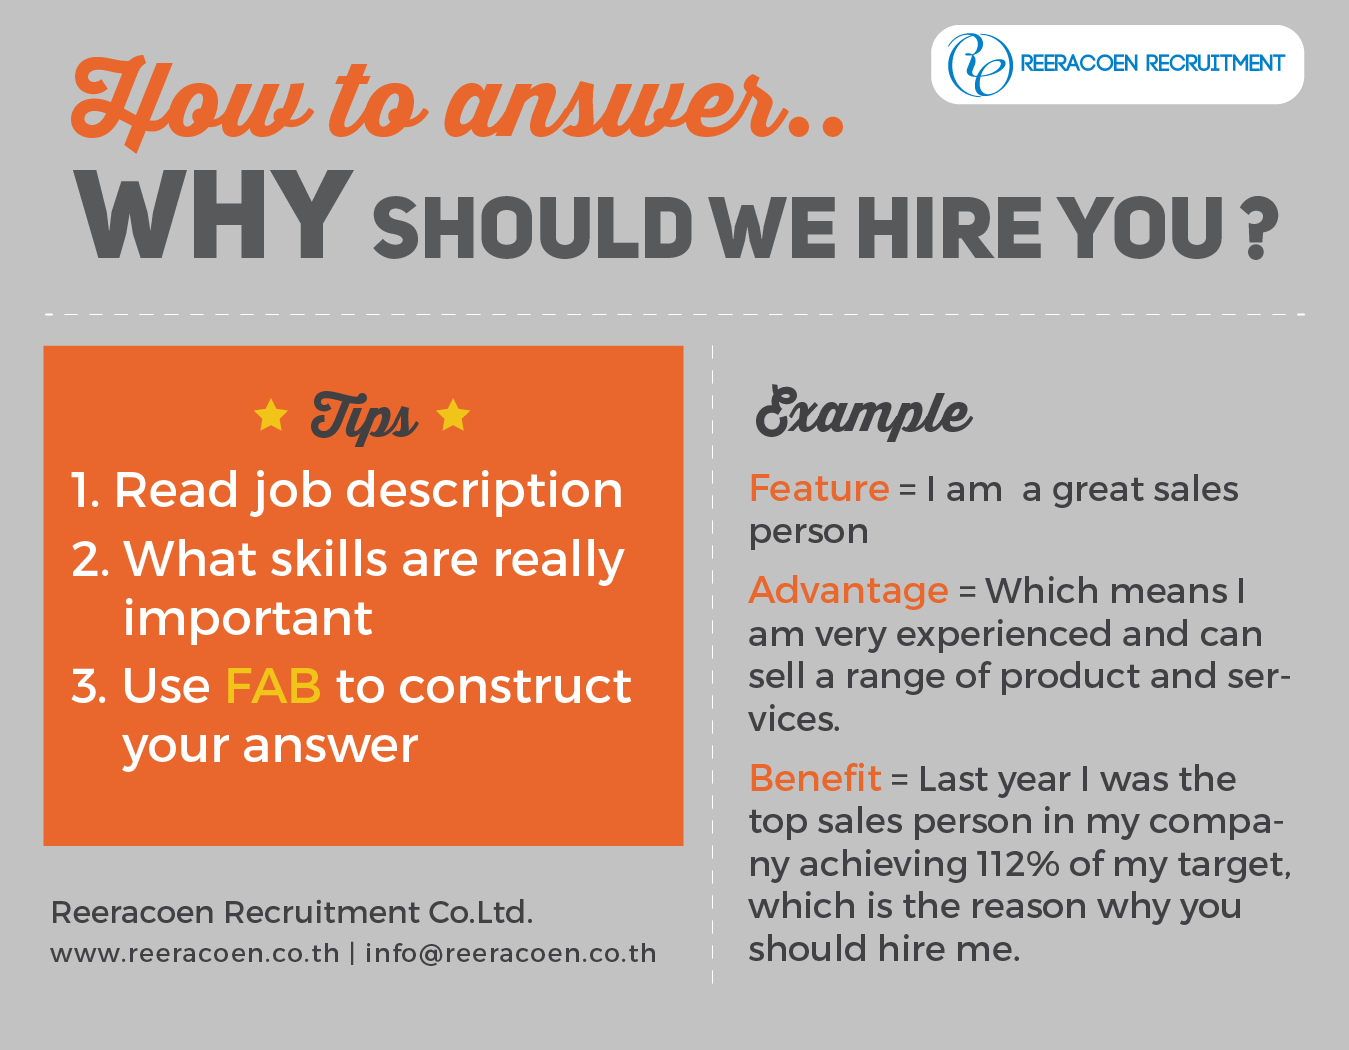 why should we hire you interview question example